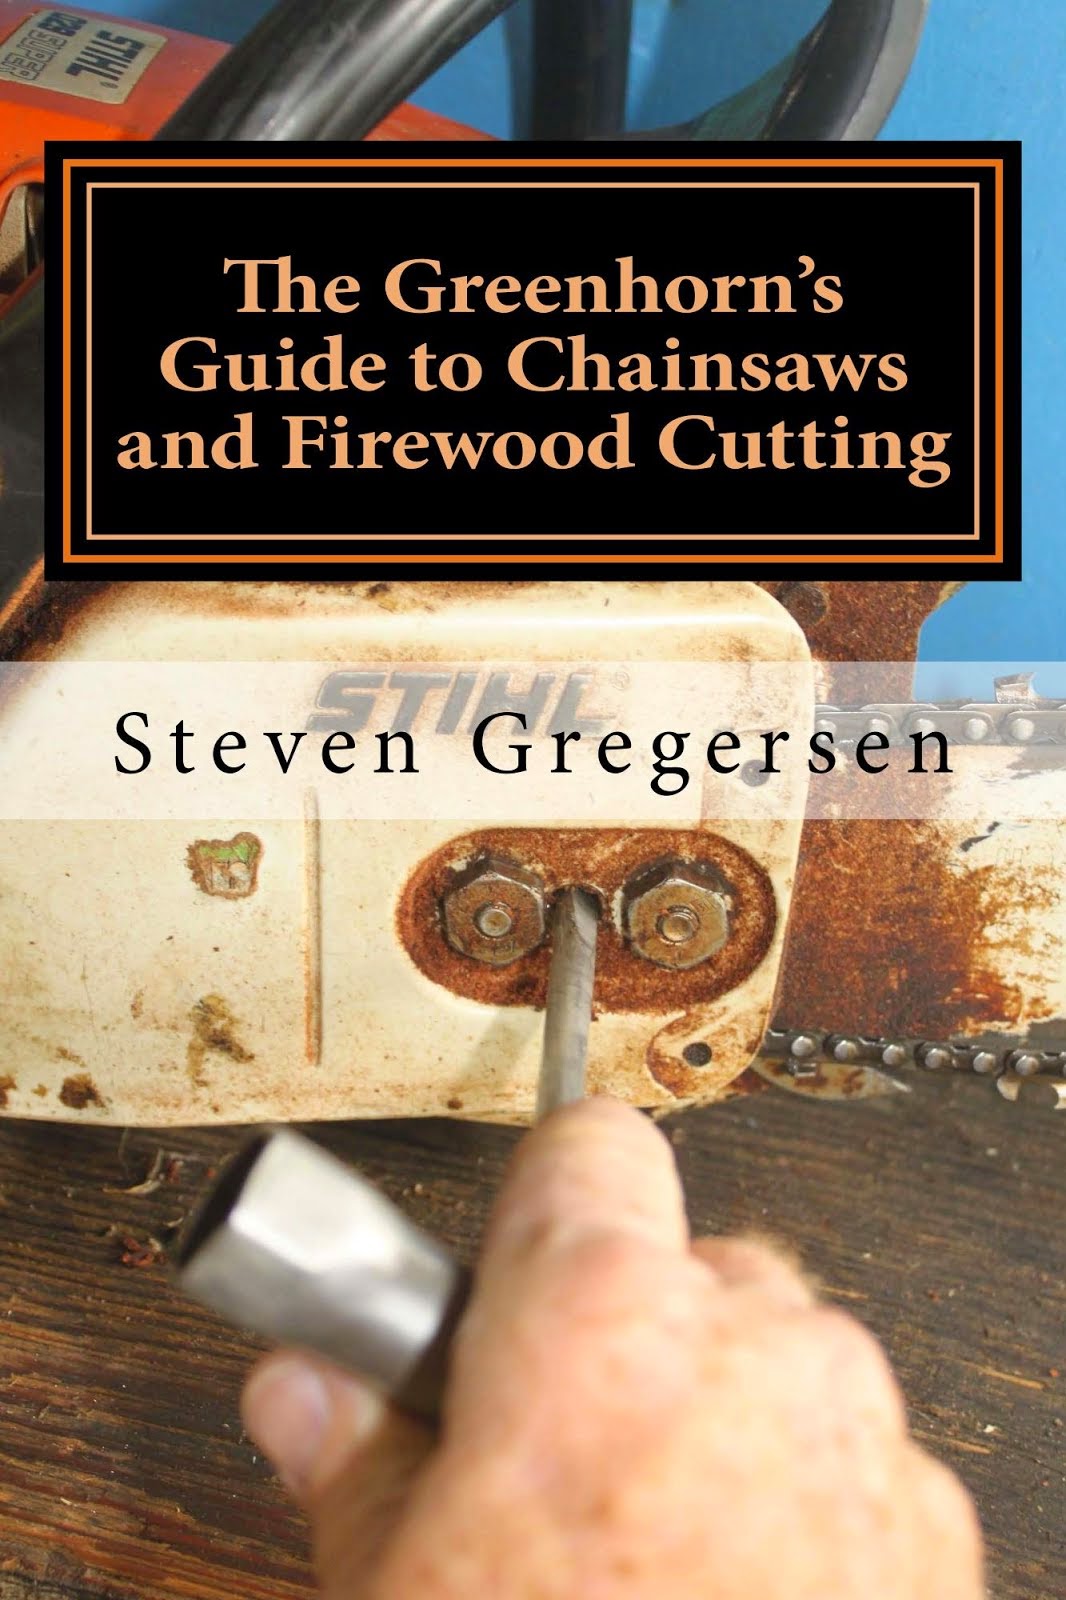 The Greehorn's Guide to Chainsaws and Firewood Cutting